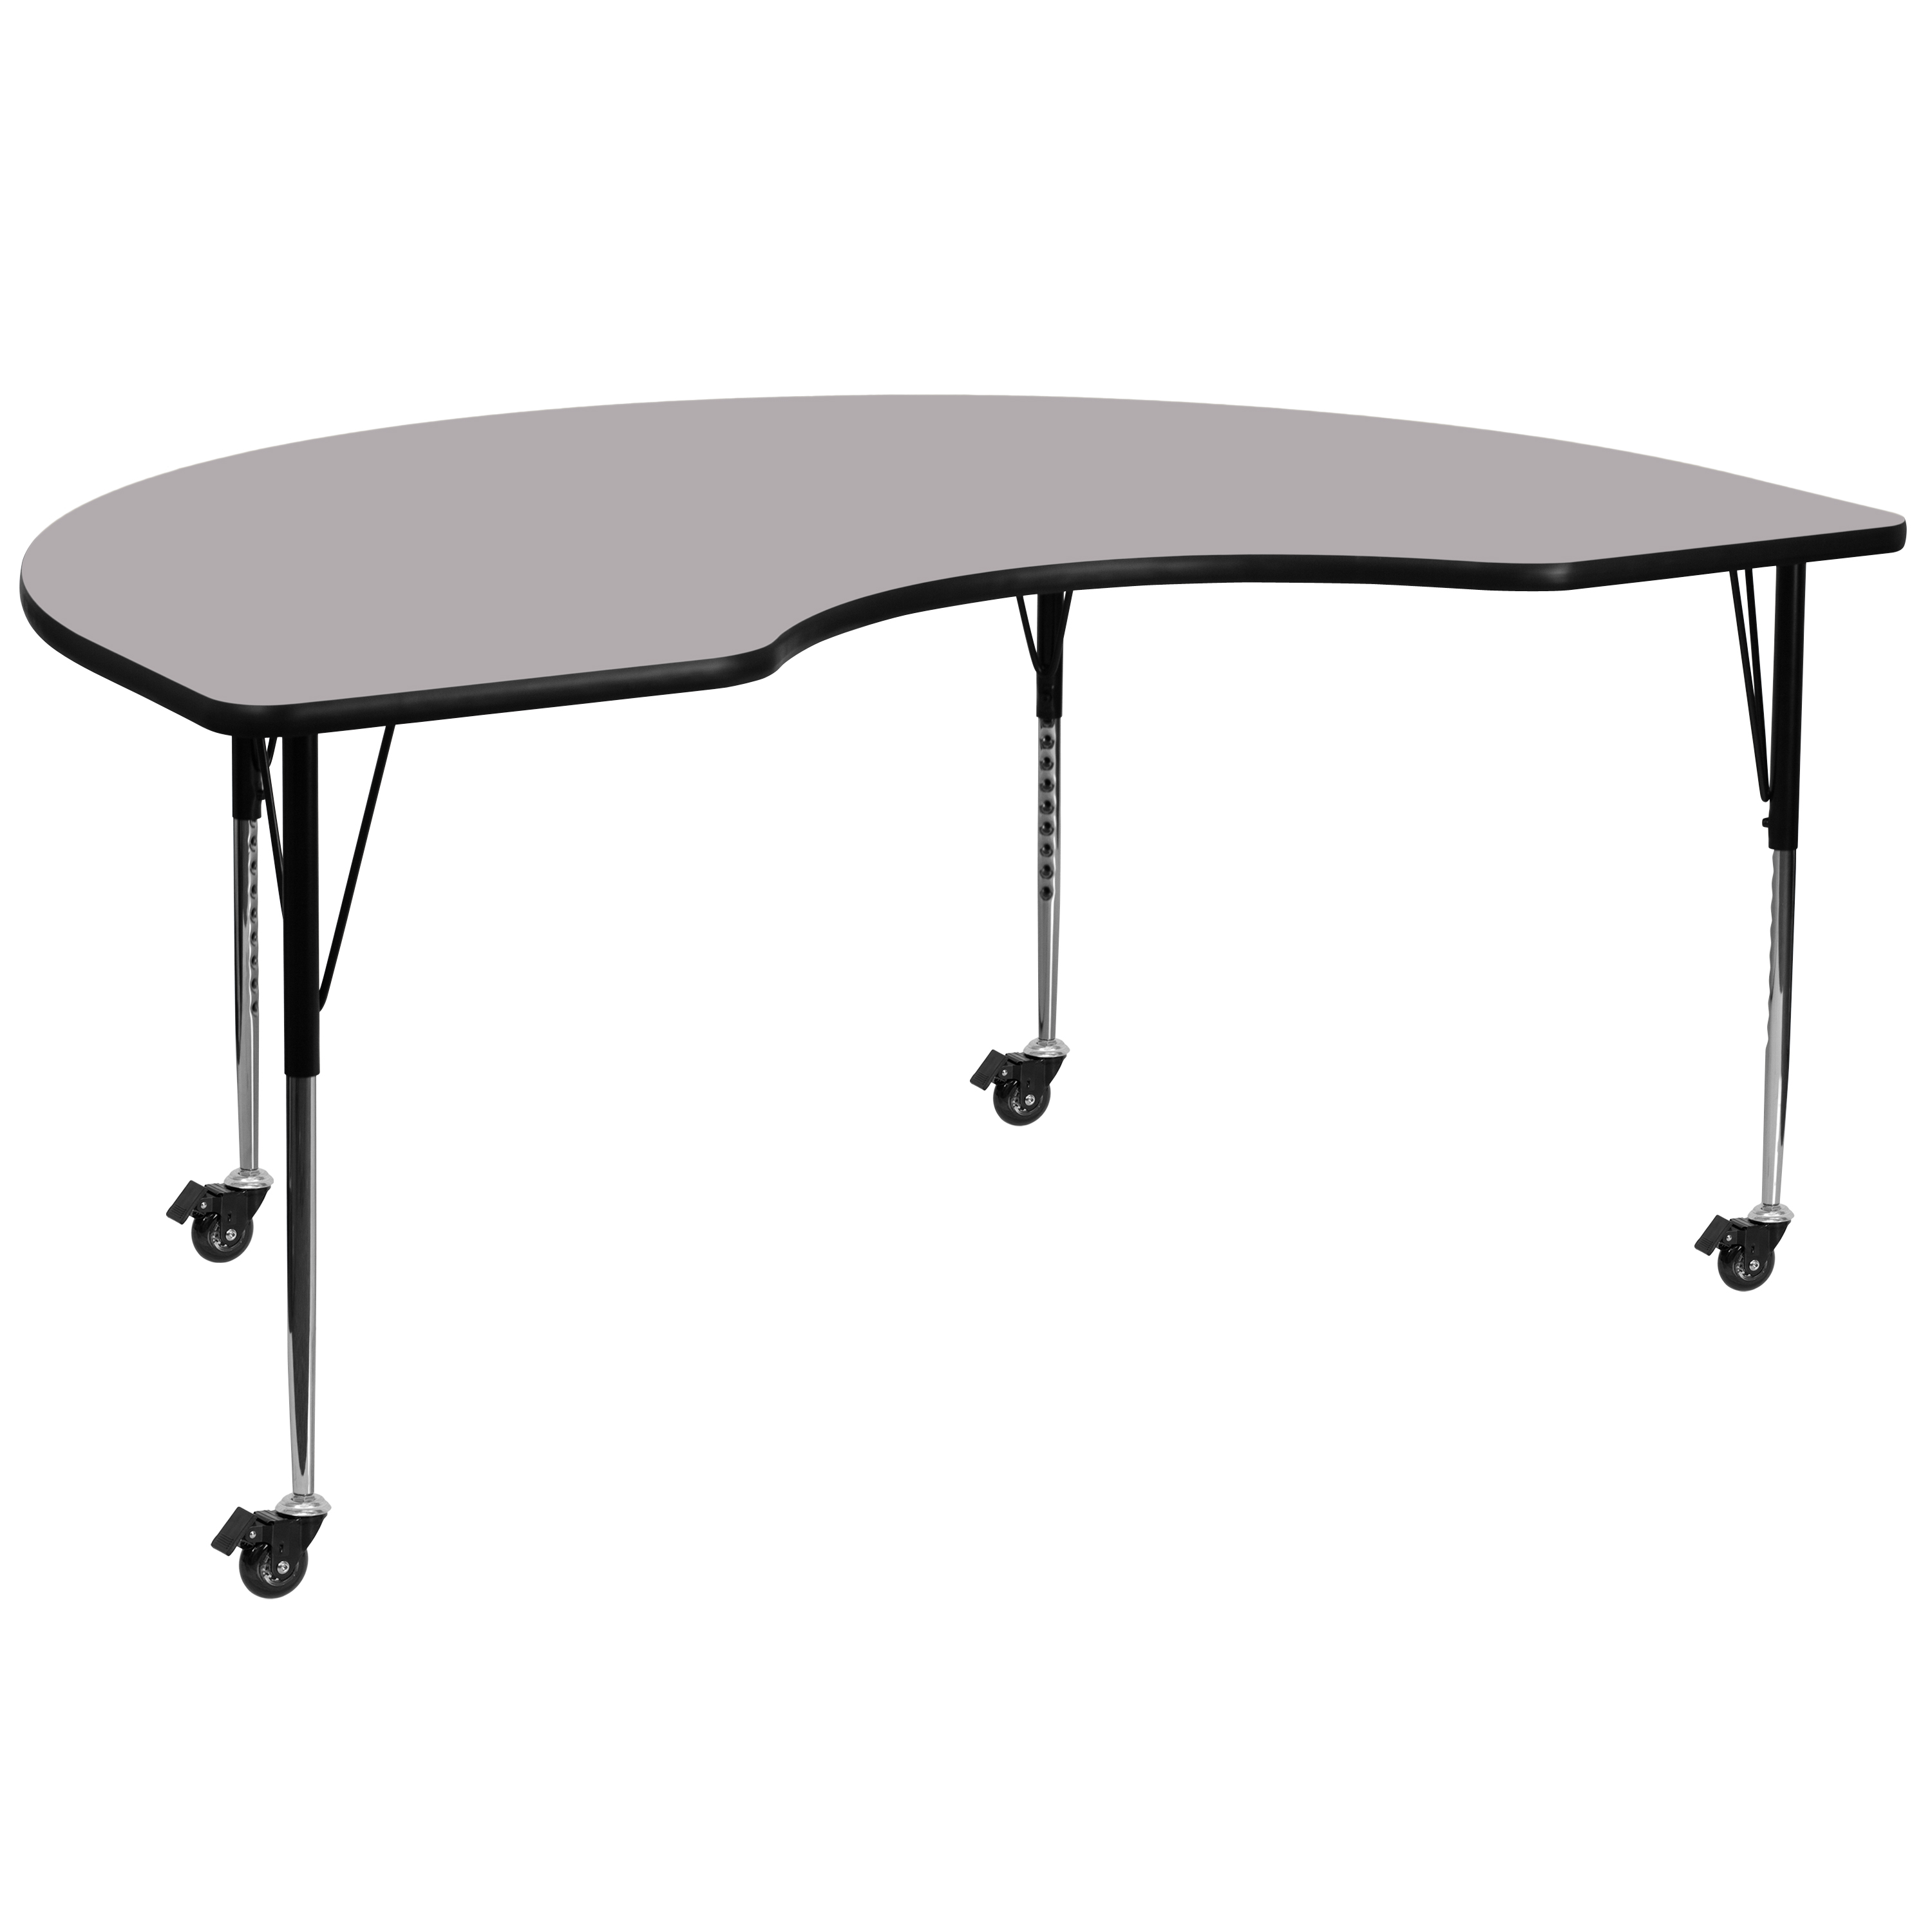 Flash Furniture Wren Mobile 48''W x 72''L Kidney Grey Thermal Laminate Activity Table - Standard Height Adjustable Legs - image 1 of 3